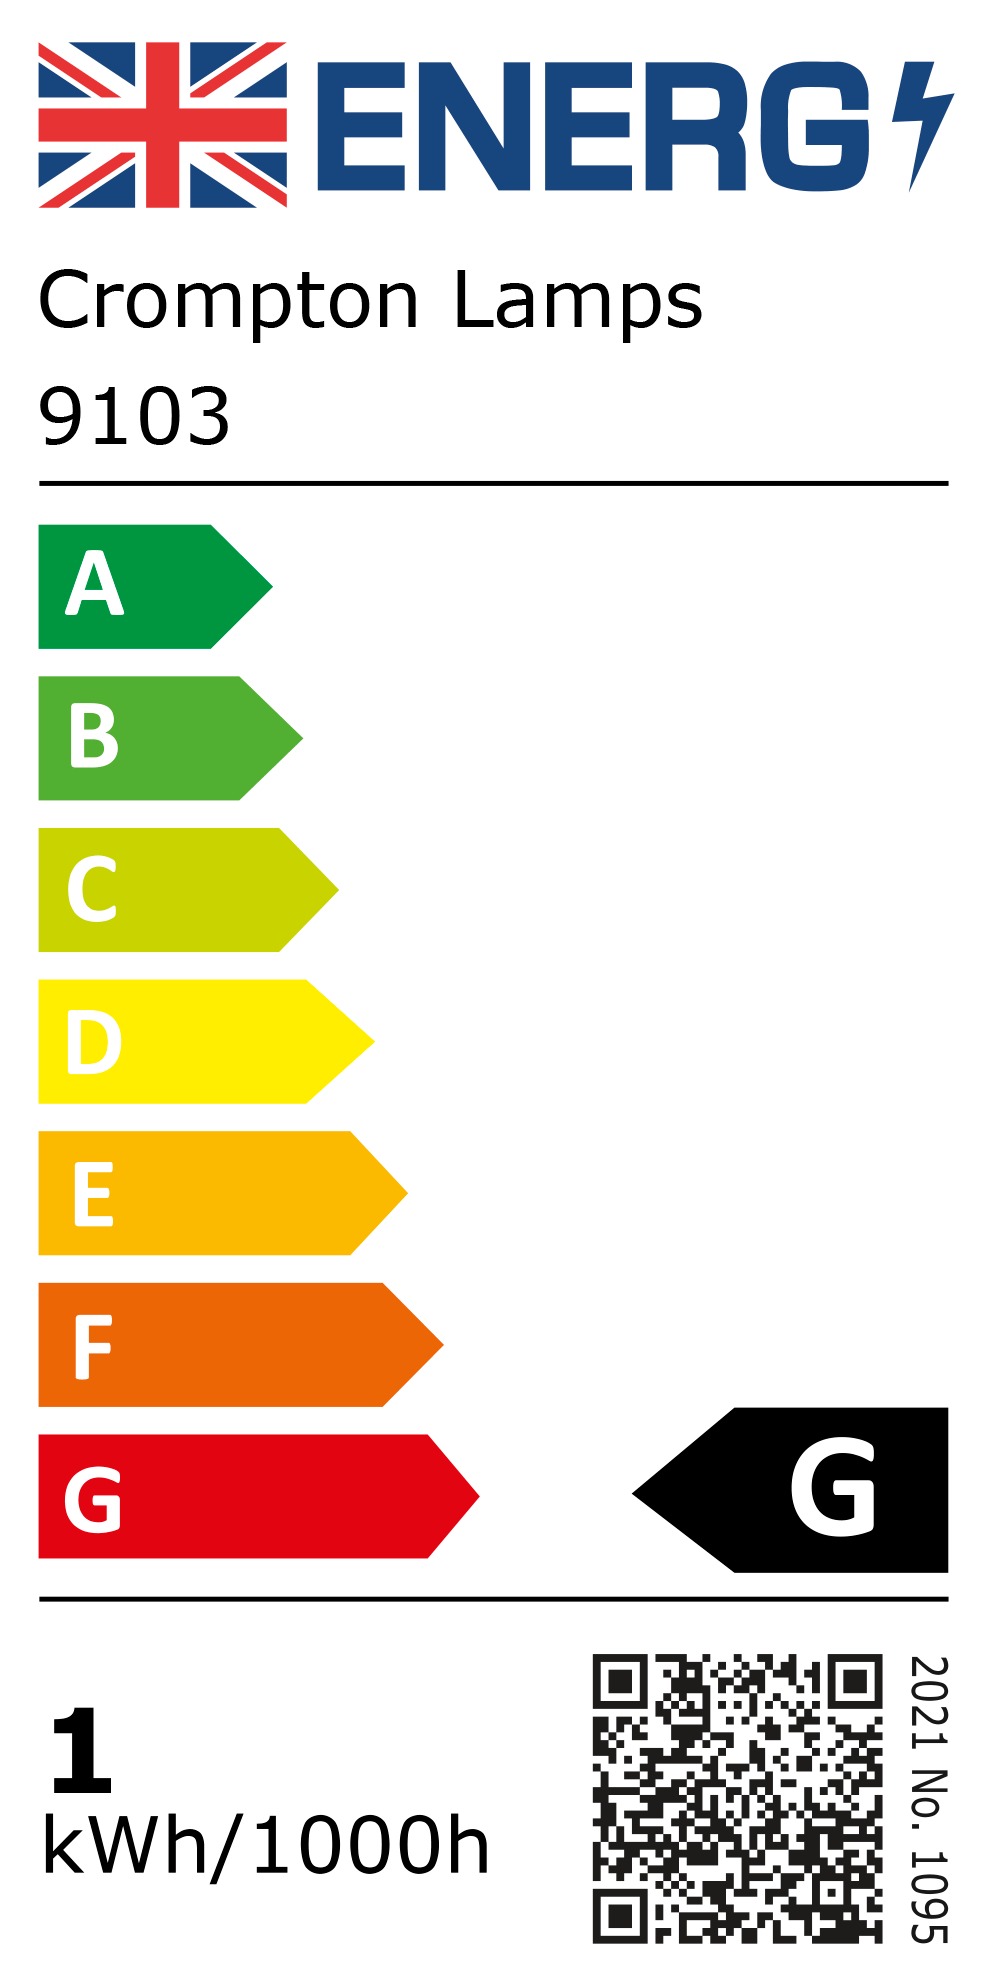 New 2021 Energy Rating Label: Stock Code 9103